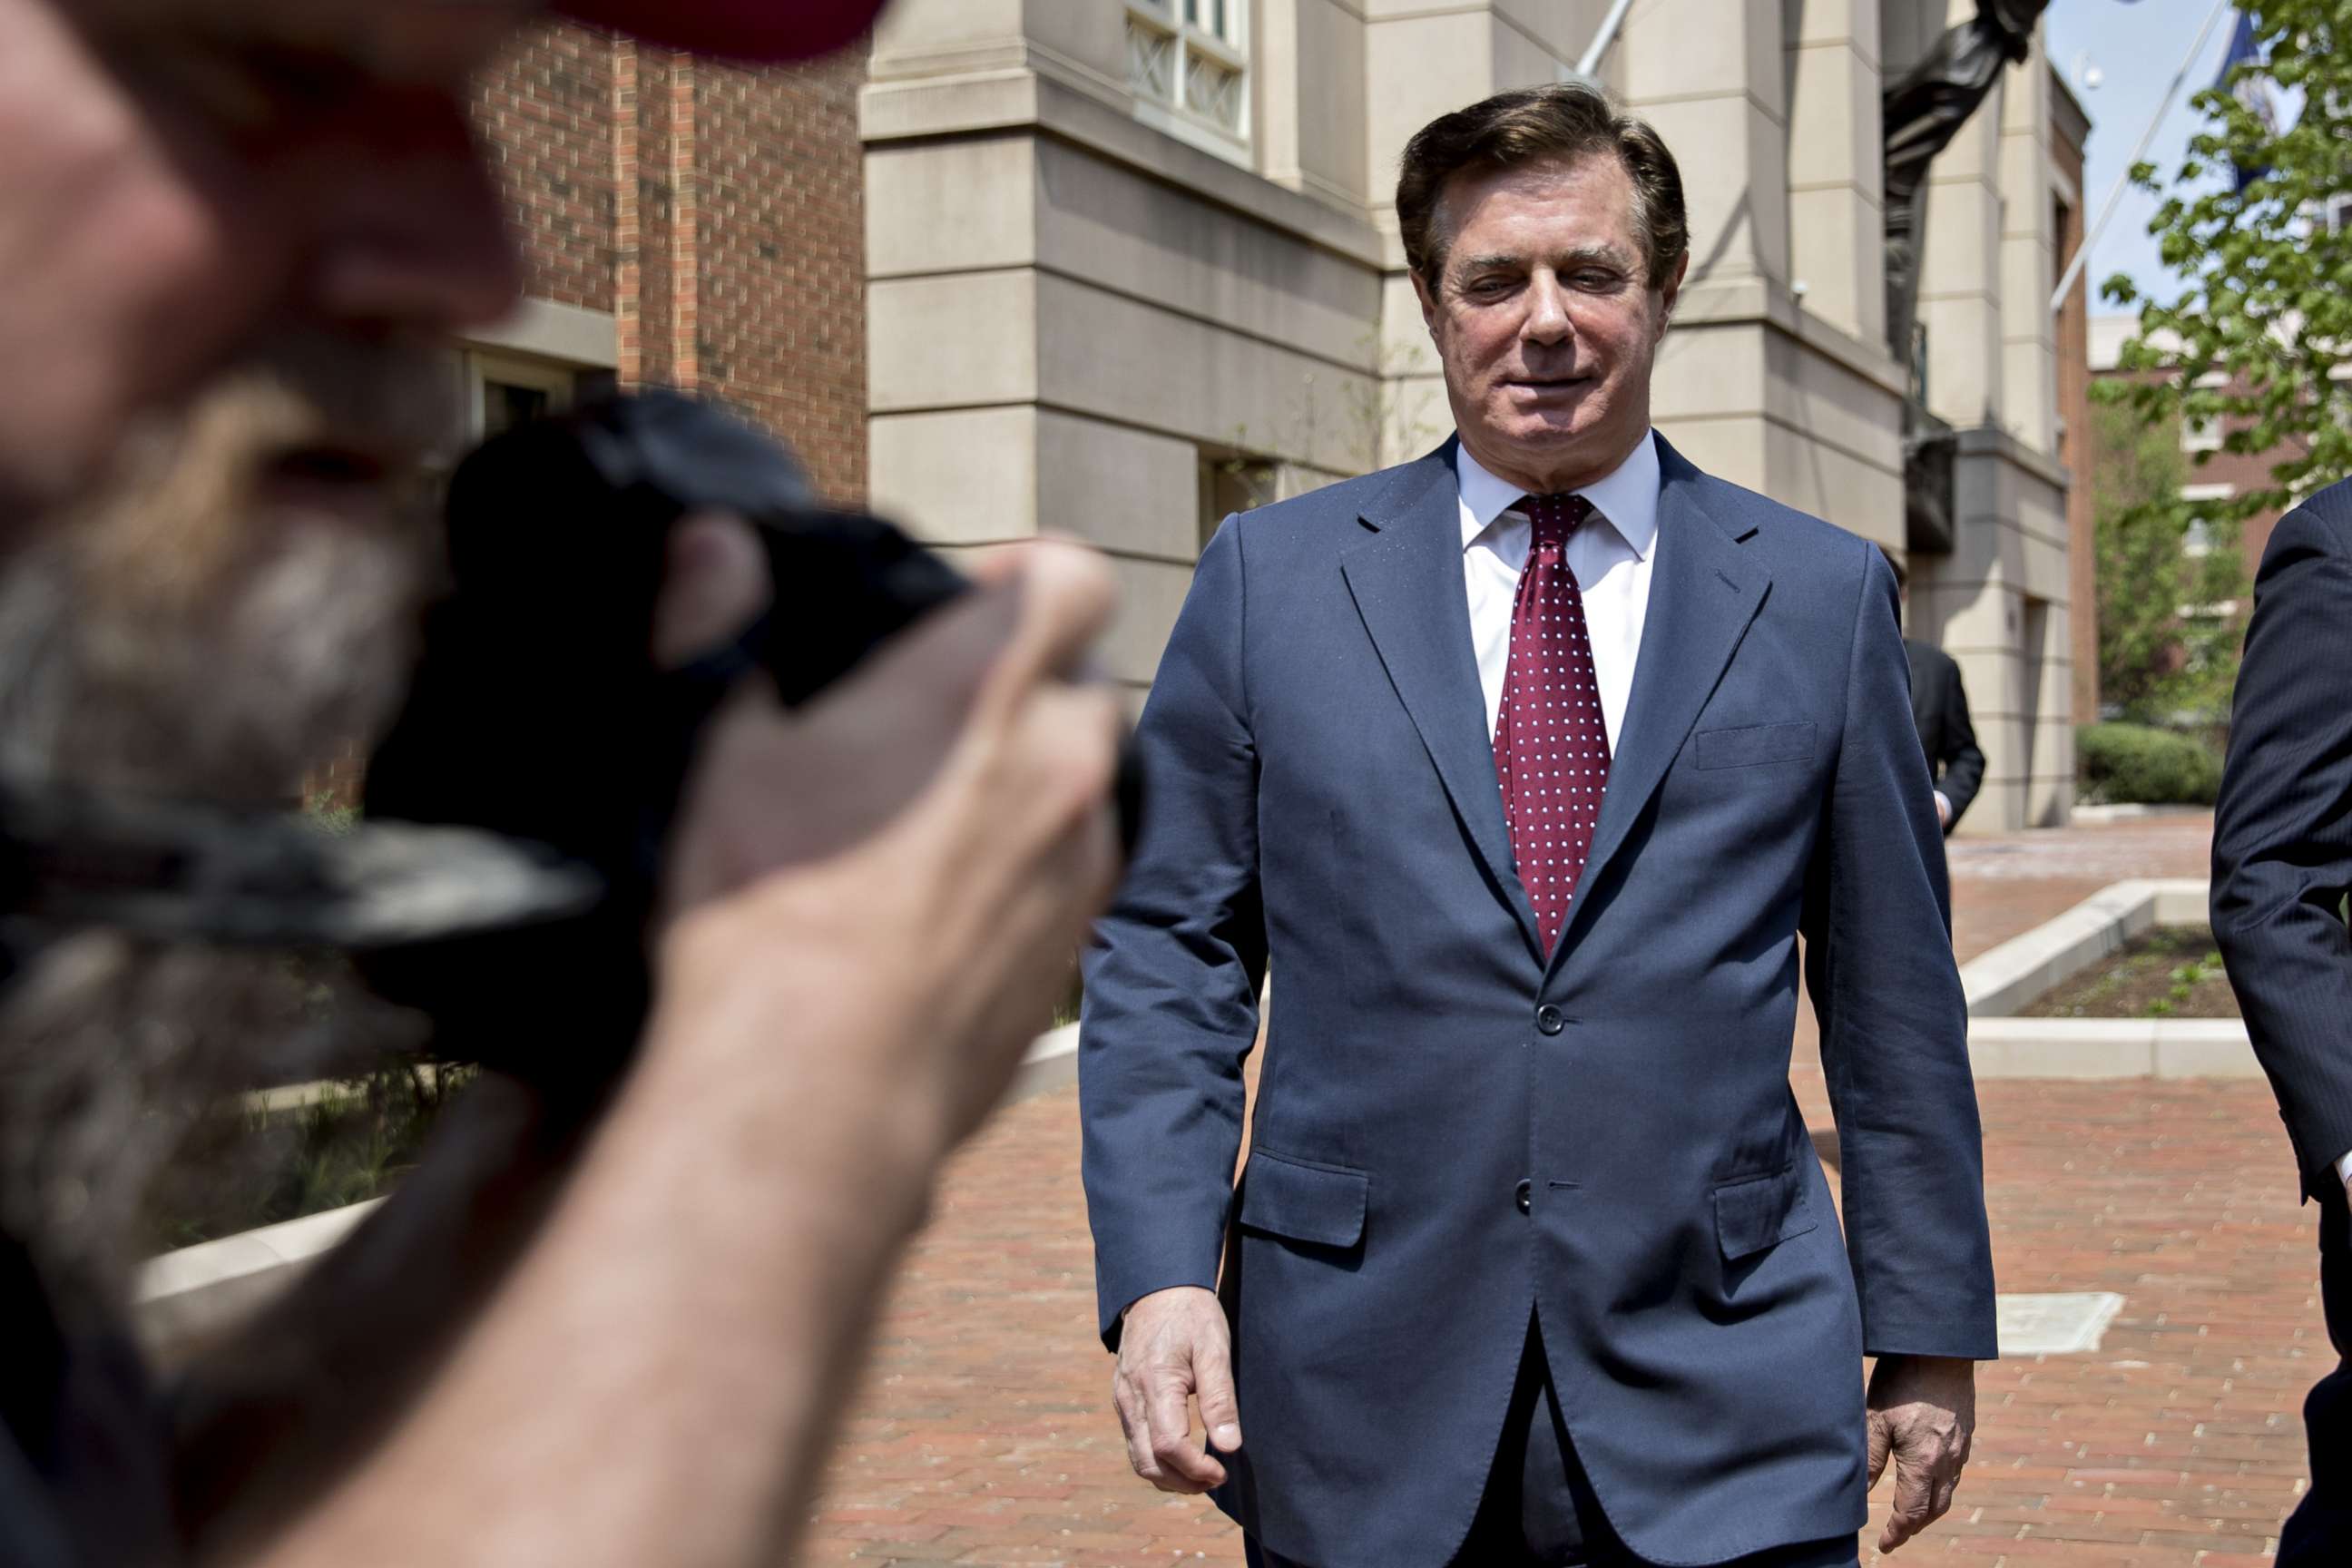 PHOTO: Paul Manafort, former campaign manager for Donald Trump, exits the District Courthouse after a motion hearing in Alexandria, Va., May 4, 2018.